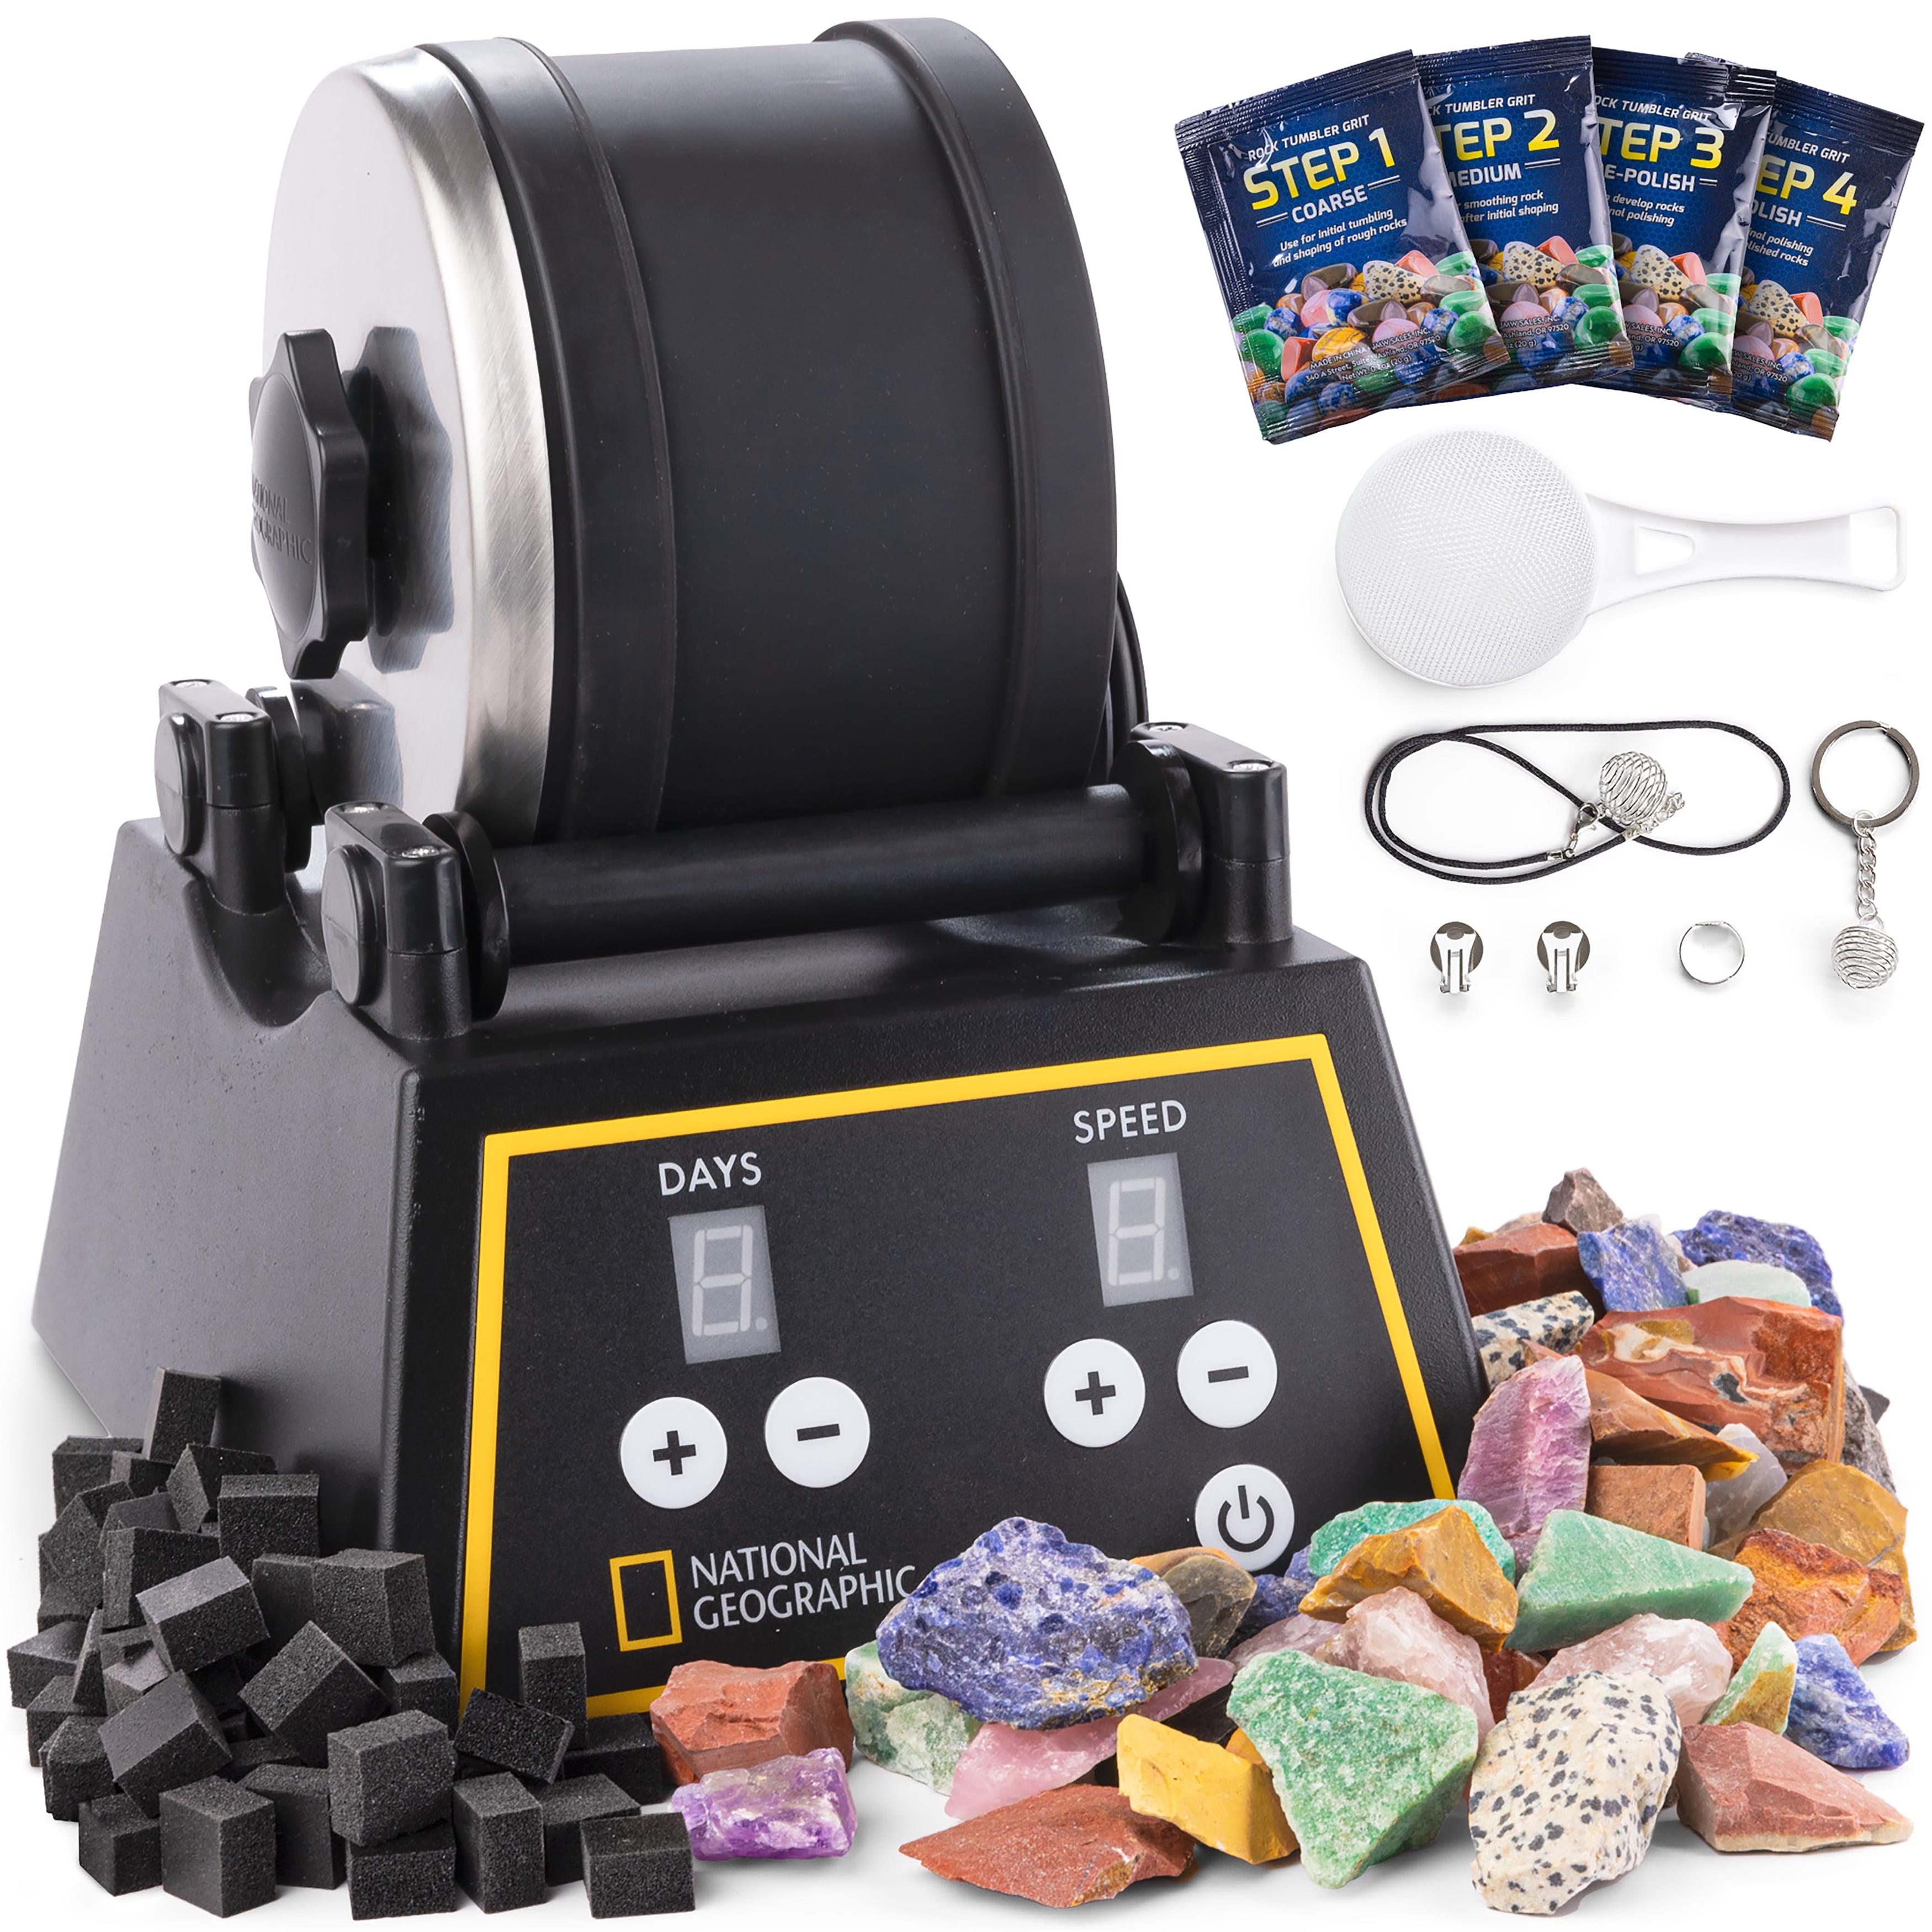 Great Choice Products Rock Tumbler Kit, Professional Rock Polisher